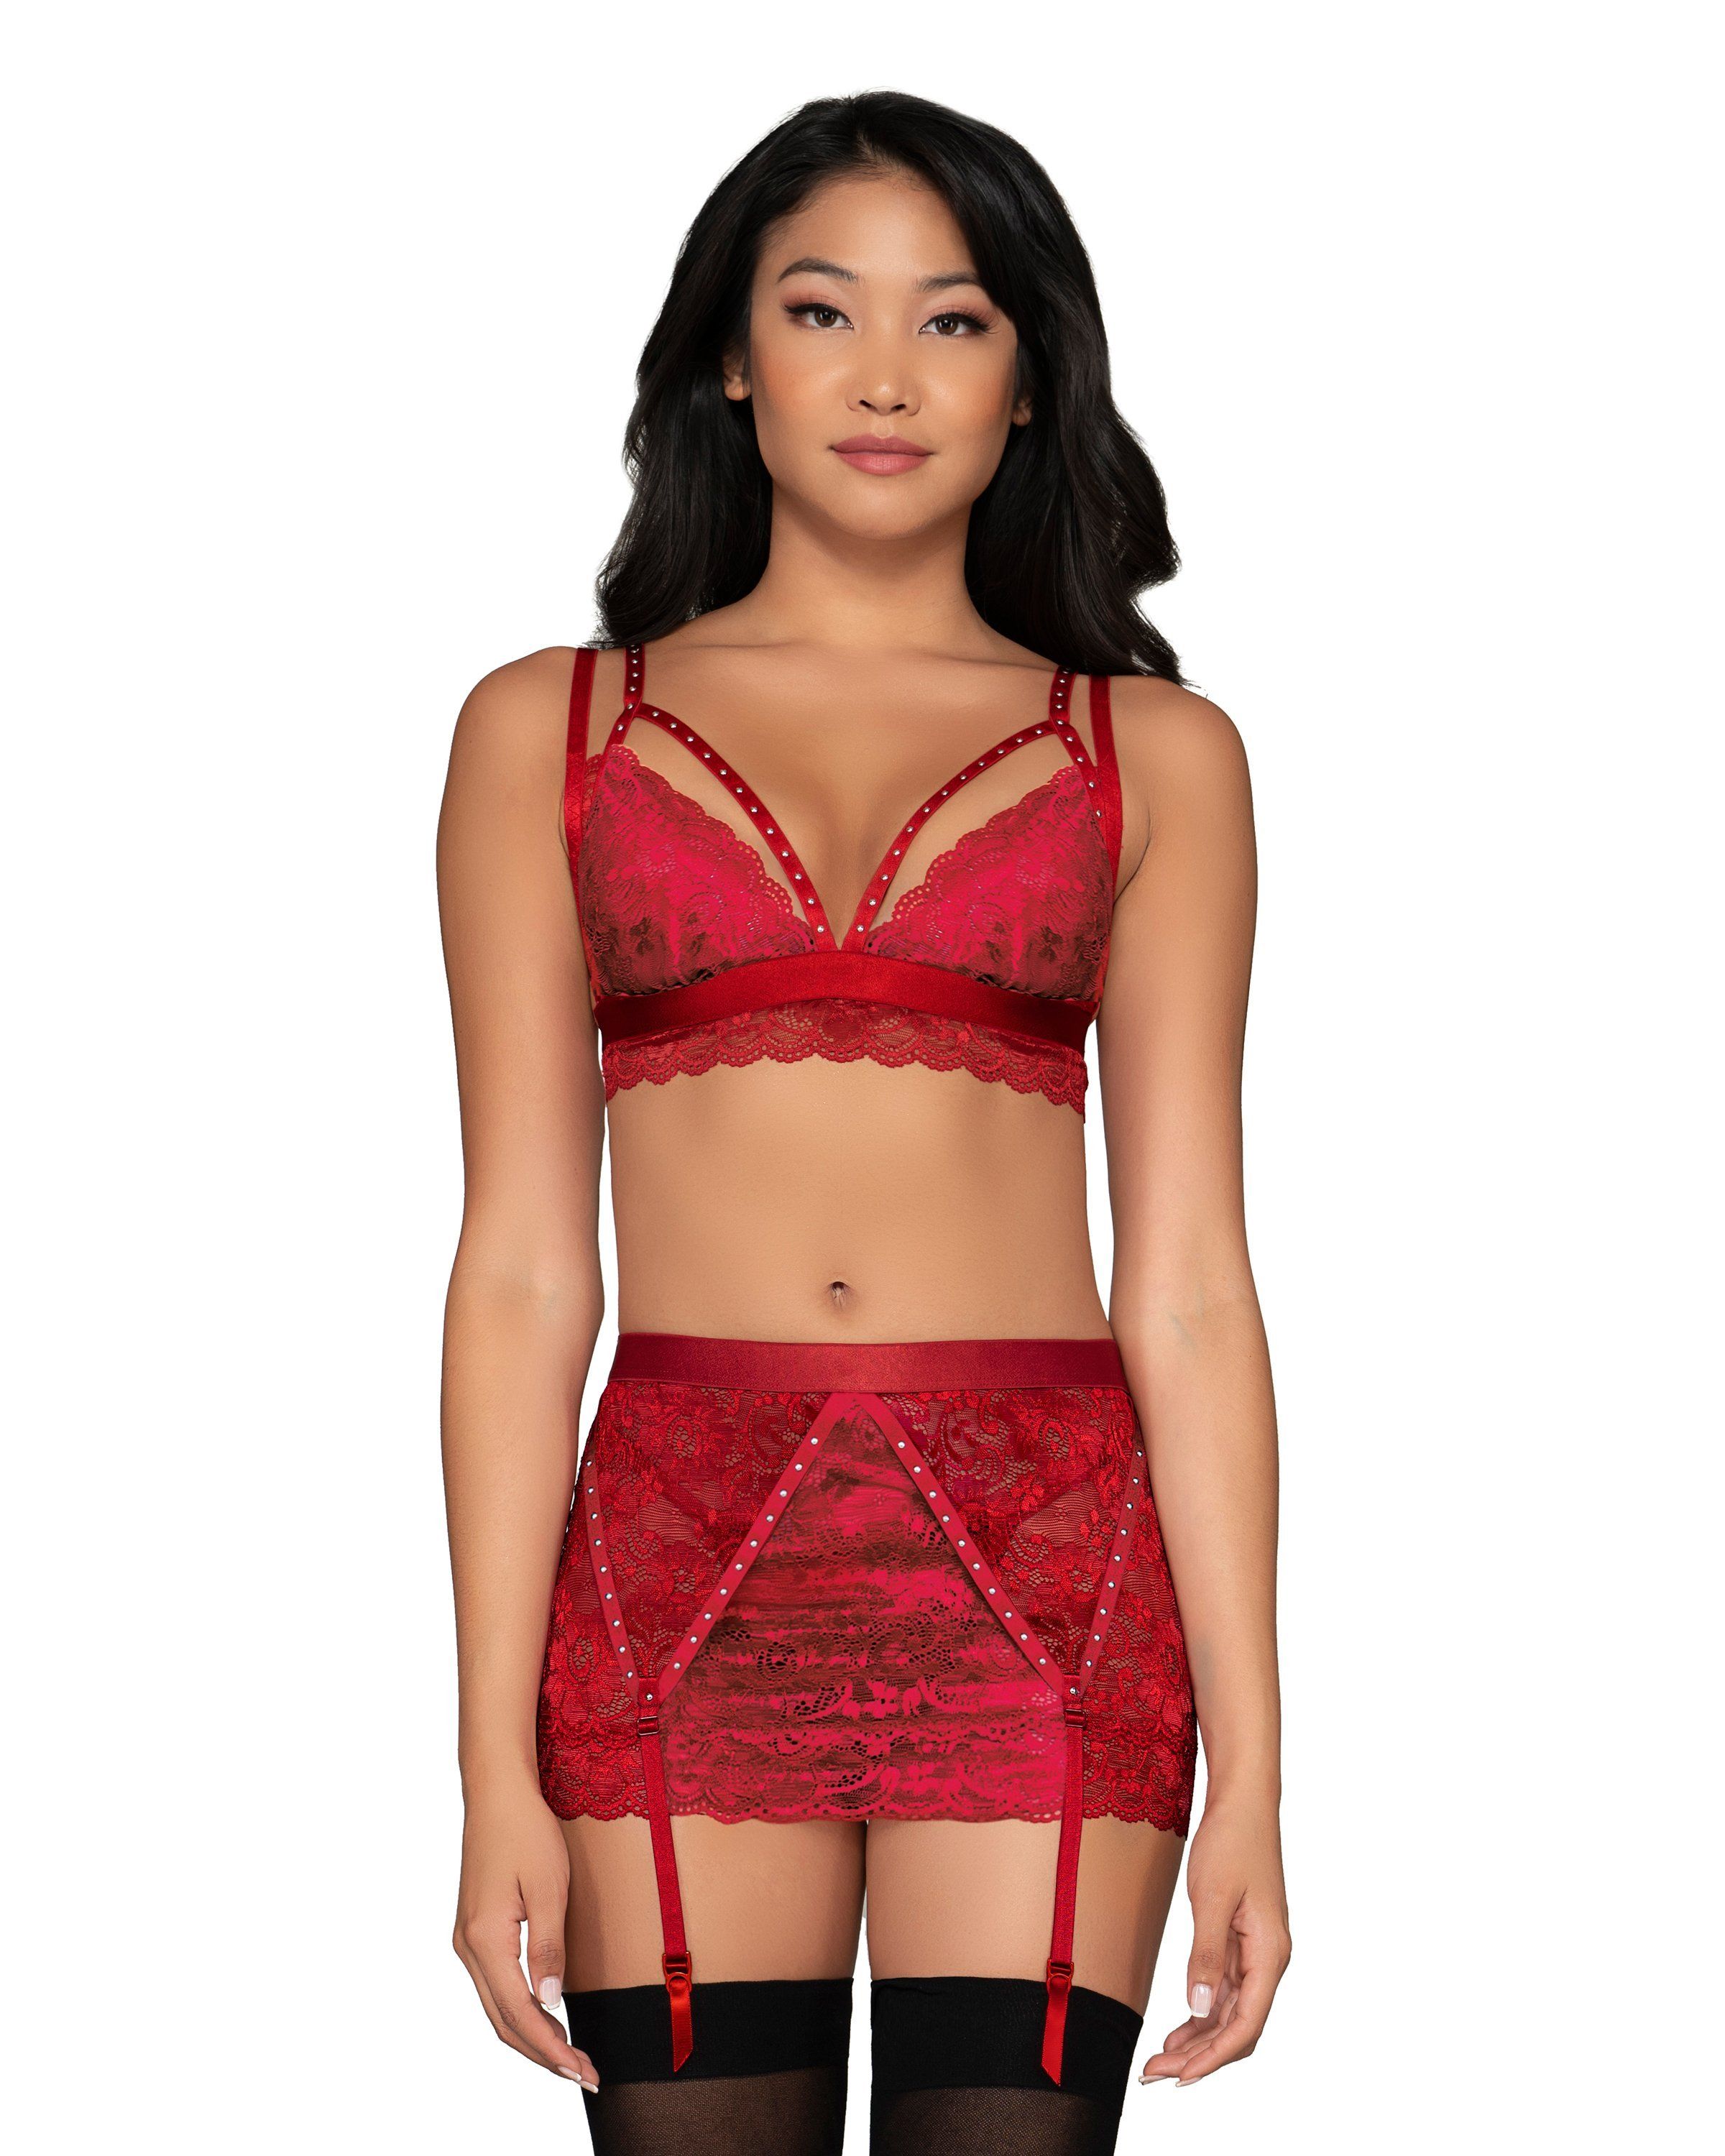 Scalloped Lace Bralette, Garterskirt & G-String Set with Studded Strapping Dreamgirl International 